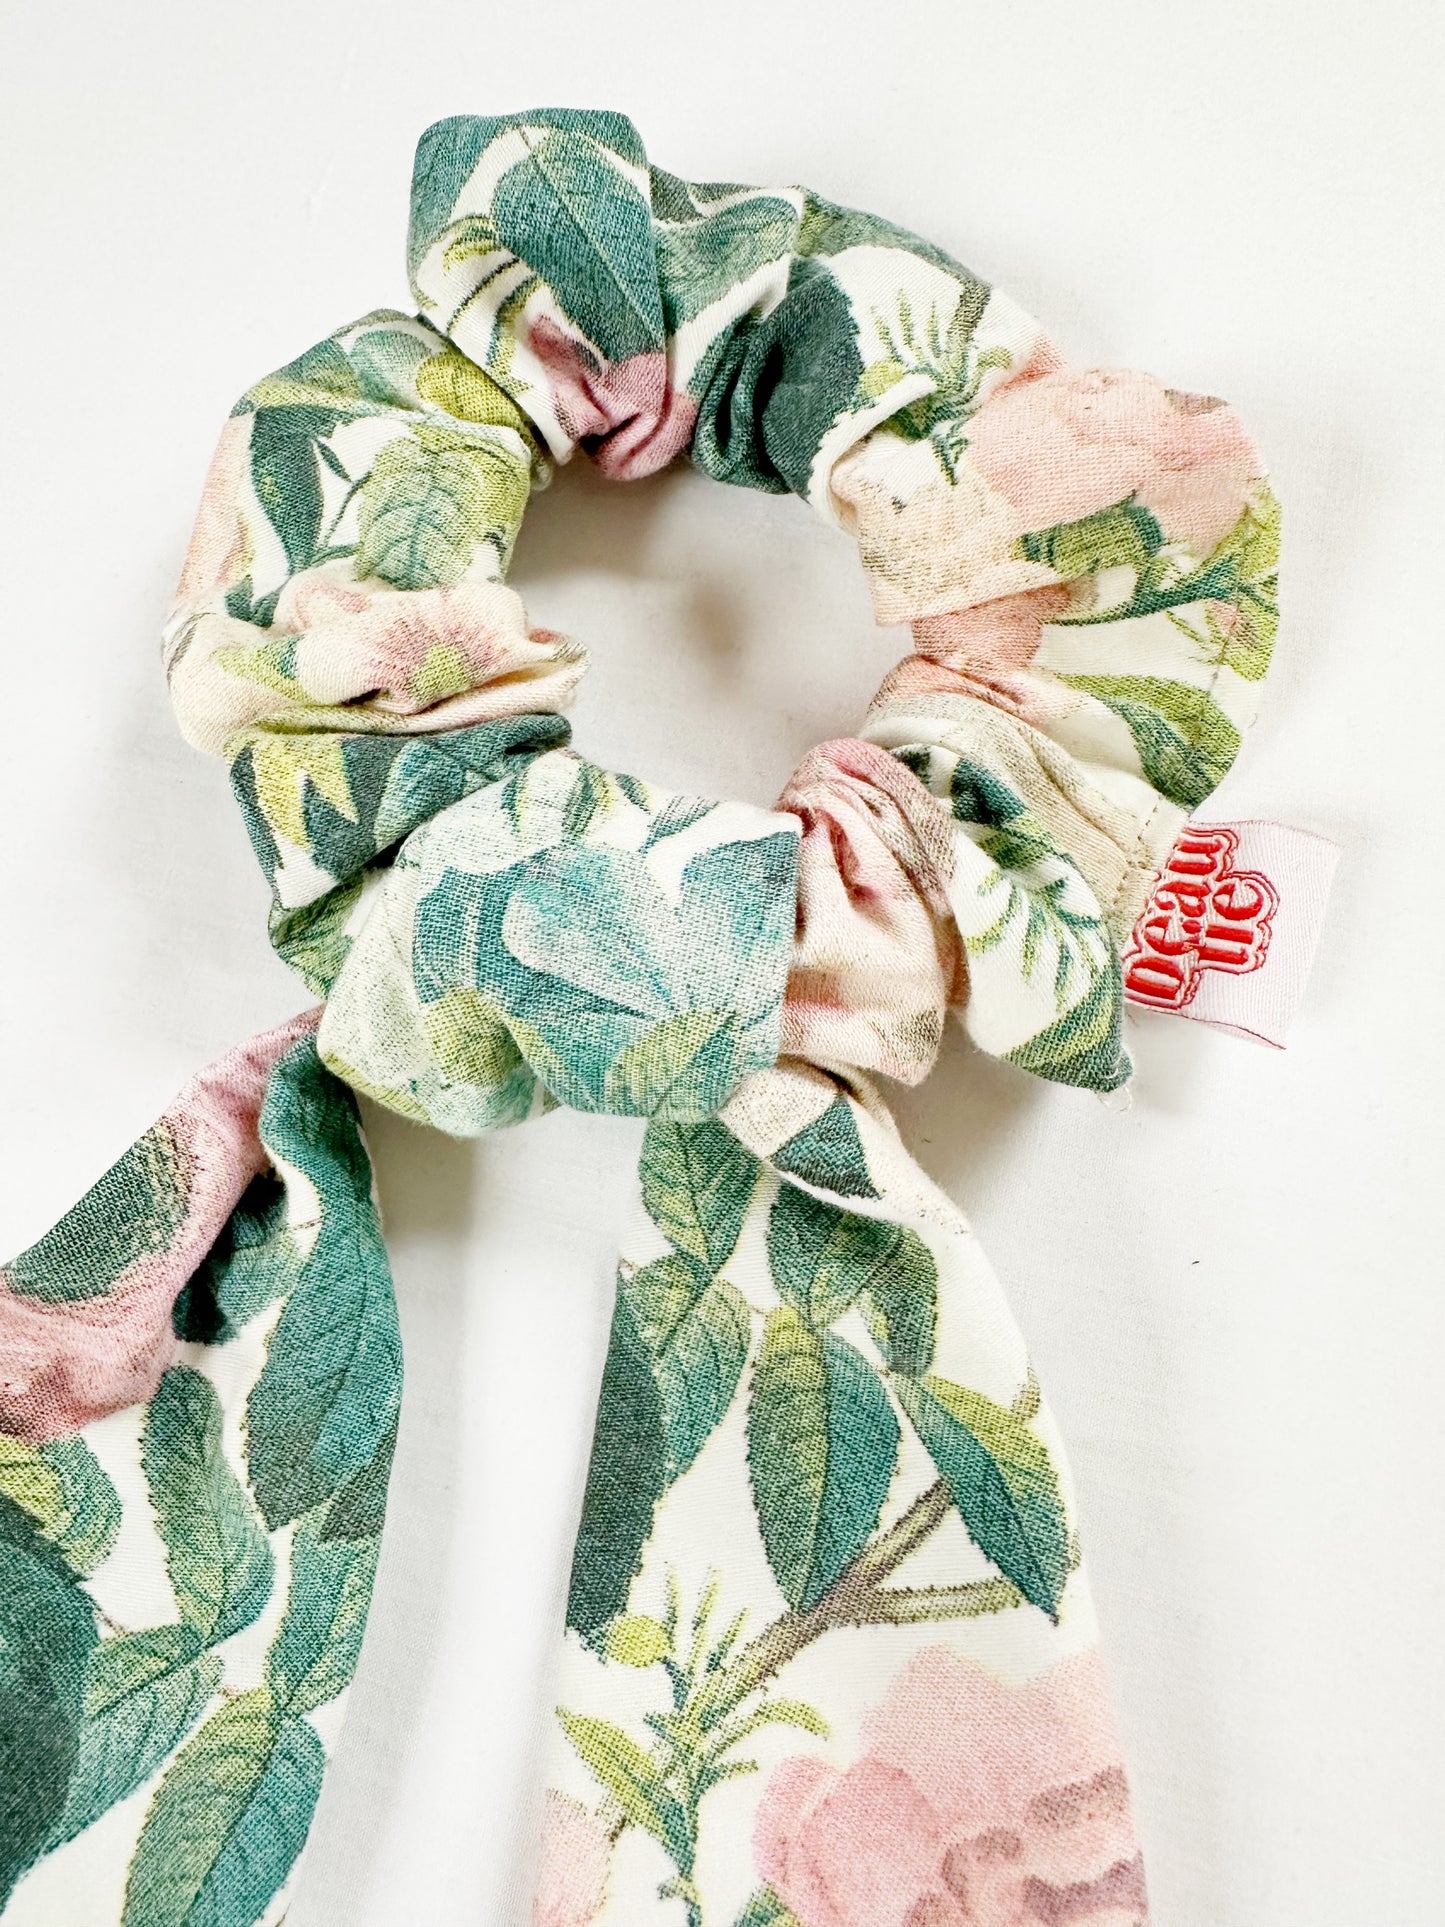 Dolly scarf scrunchie in Beatrice floral